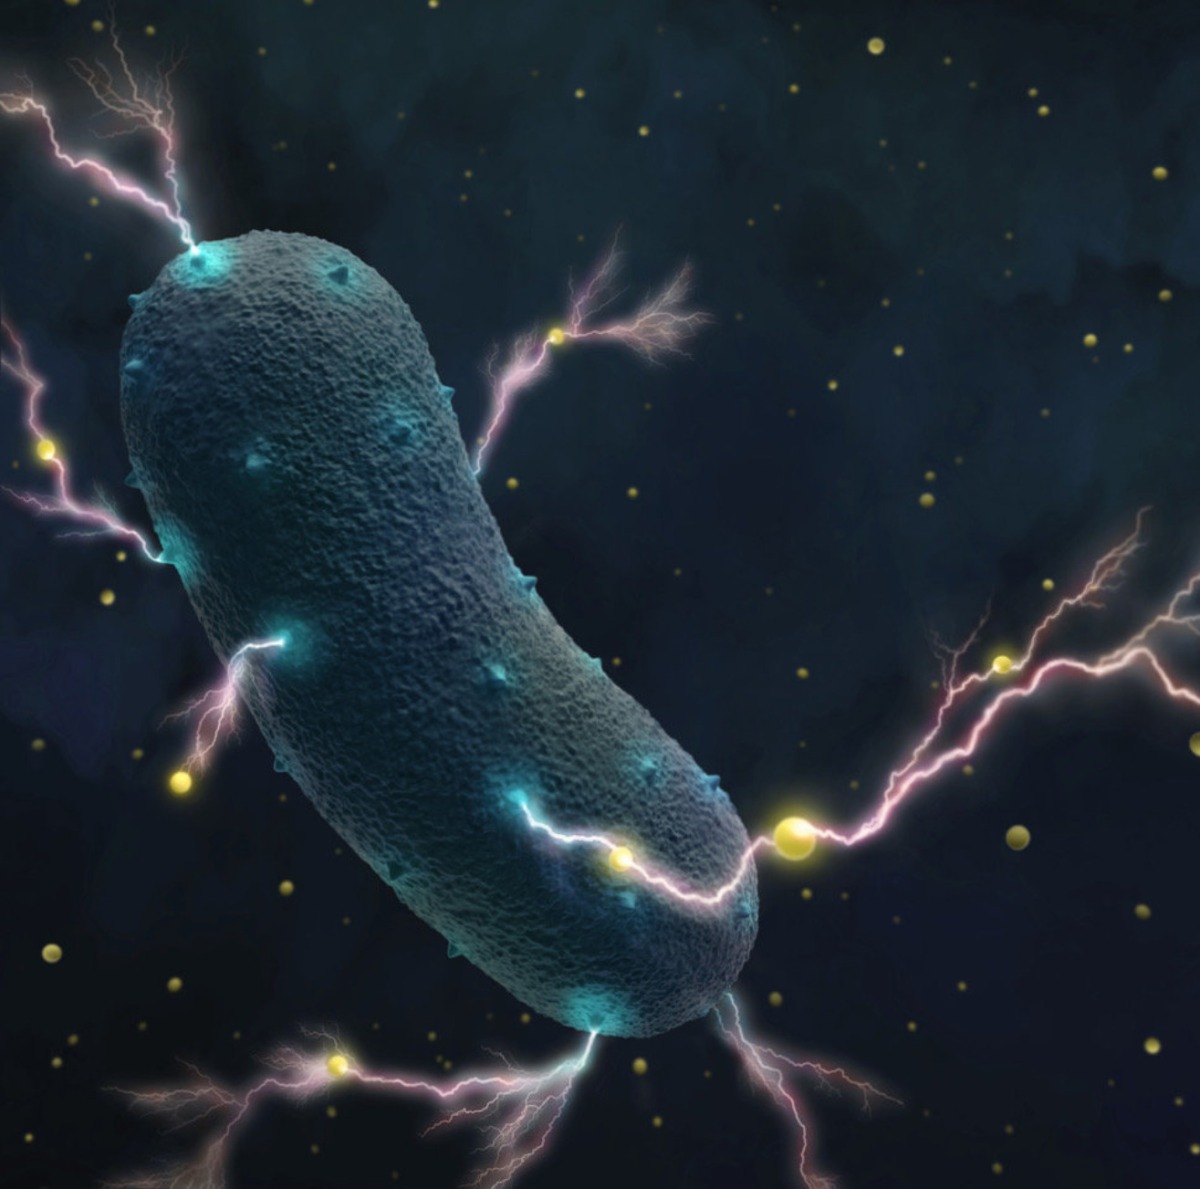 Hundreds of electricity-generating bacteria found, including pathogenic, probiotic and fermenting bacteria